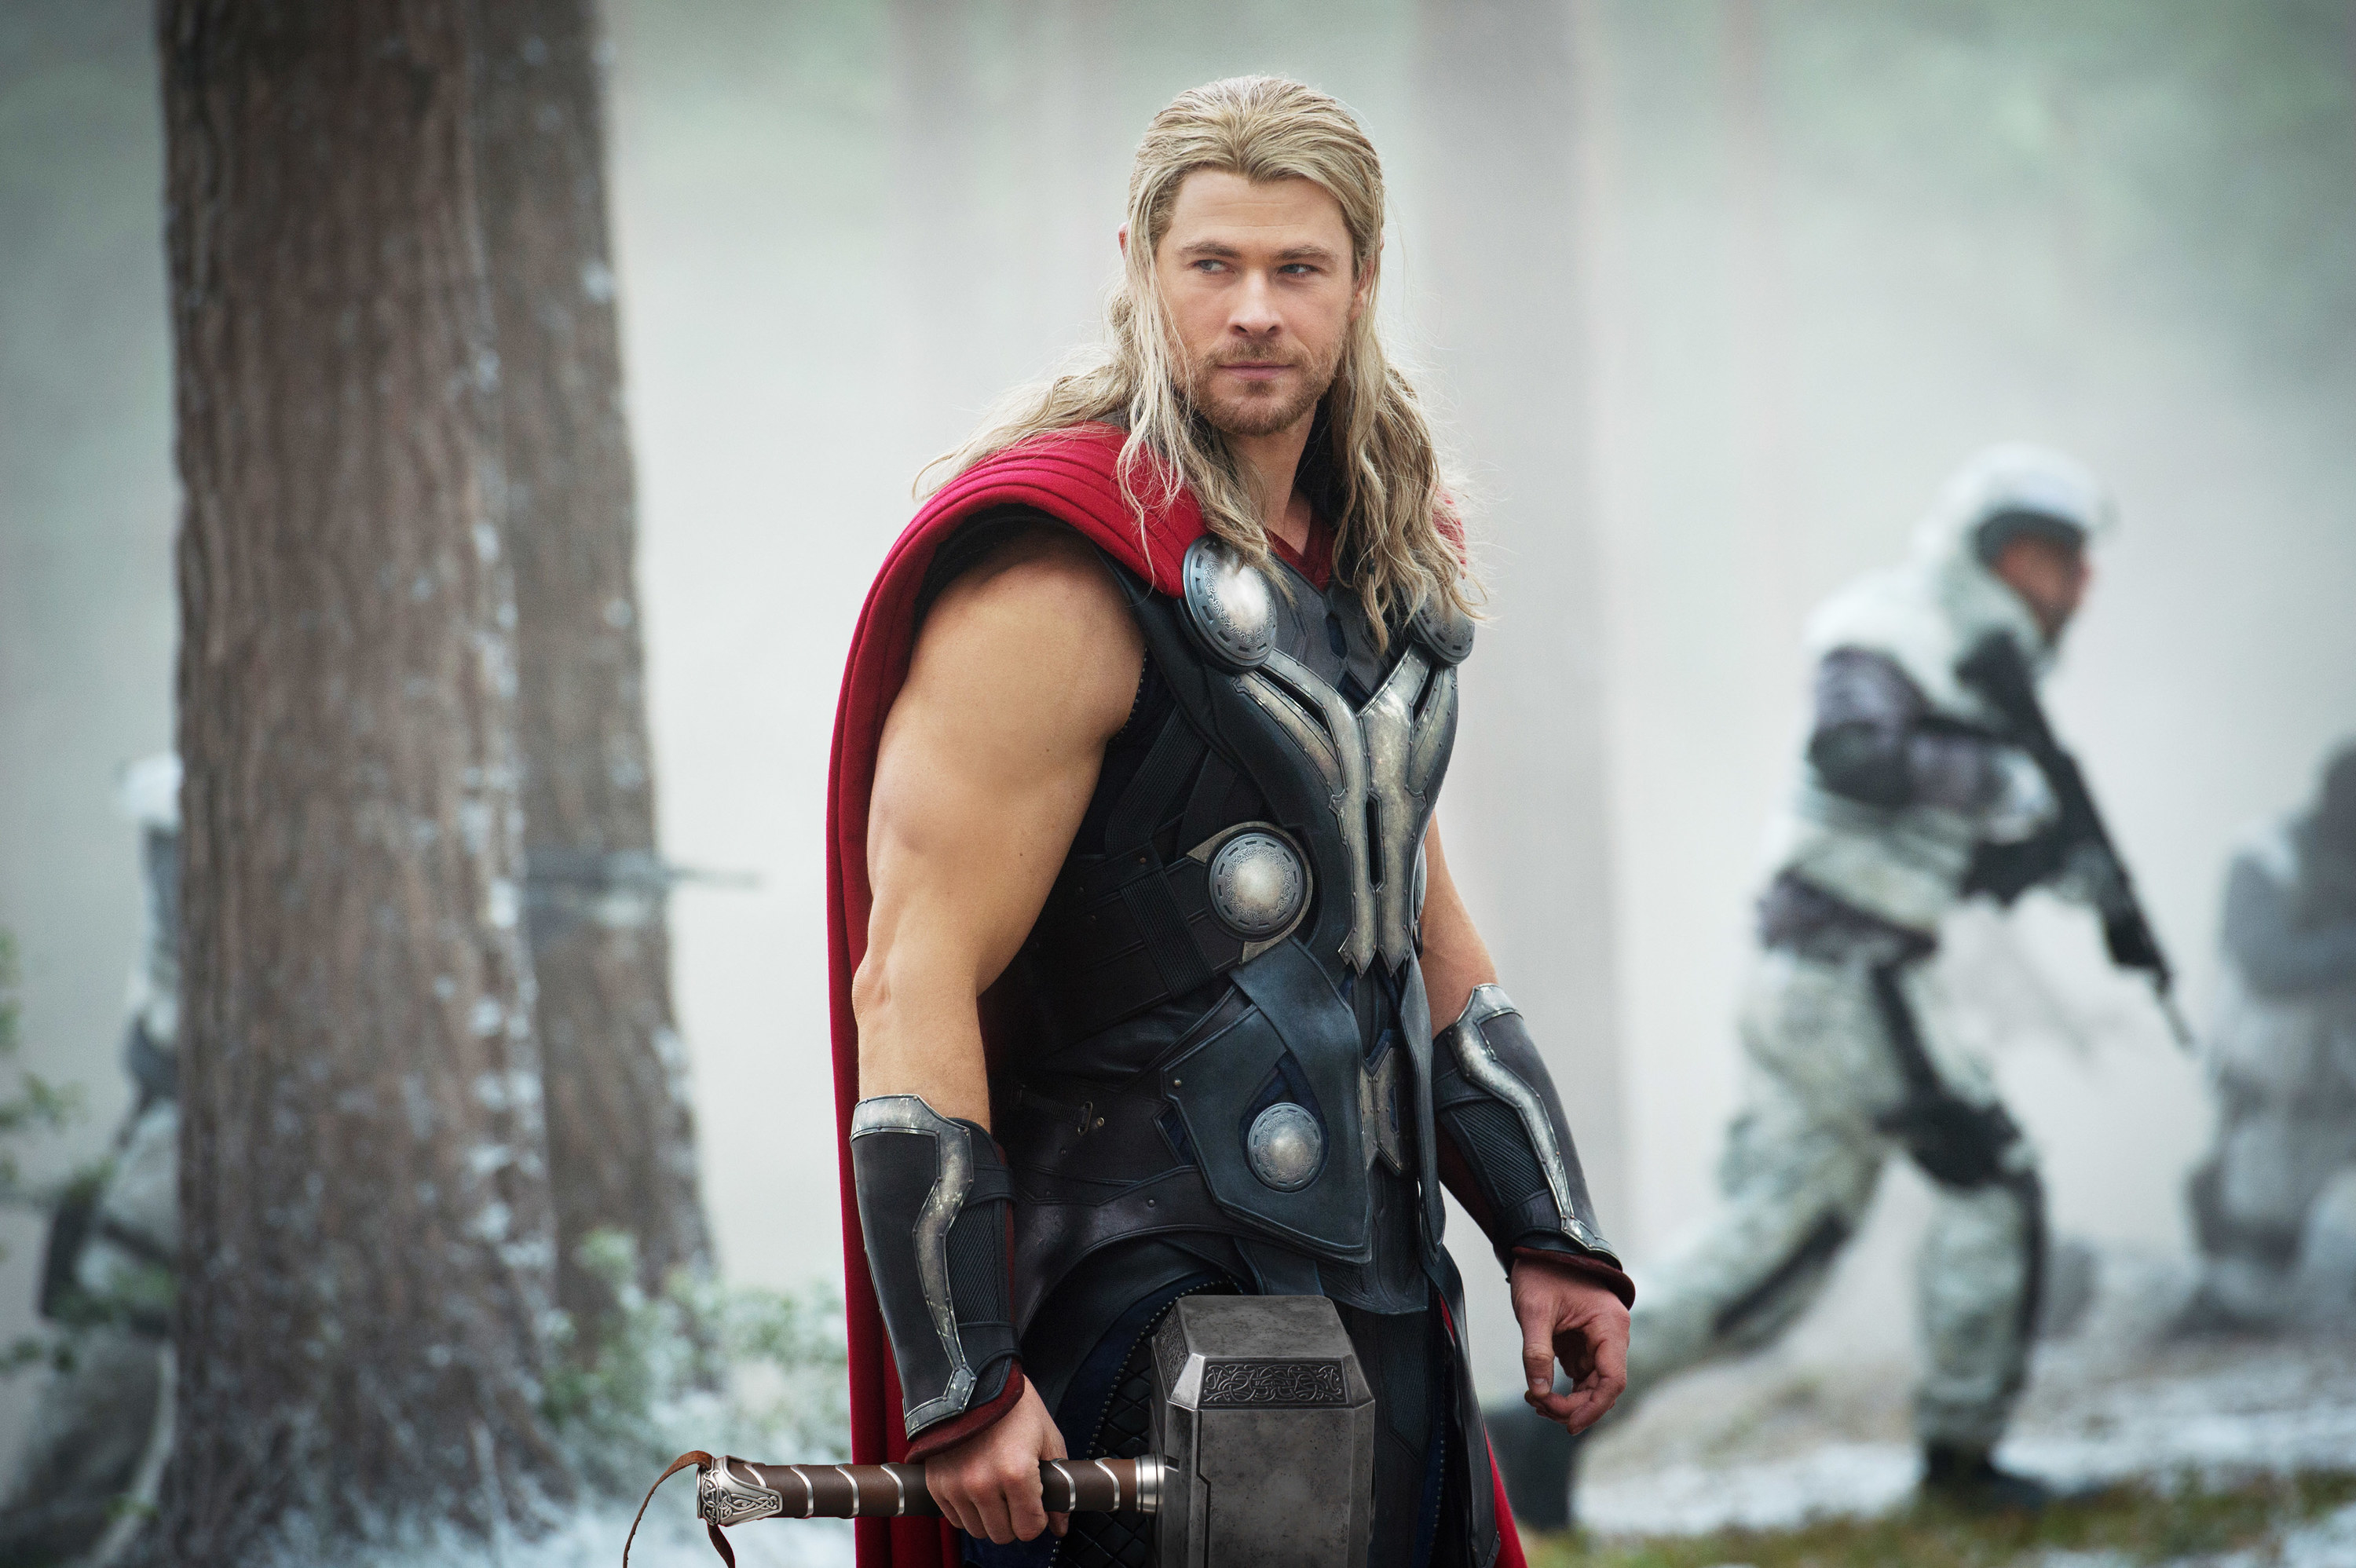 Chris as Thor wearing an armored suit and holding a large hammer